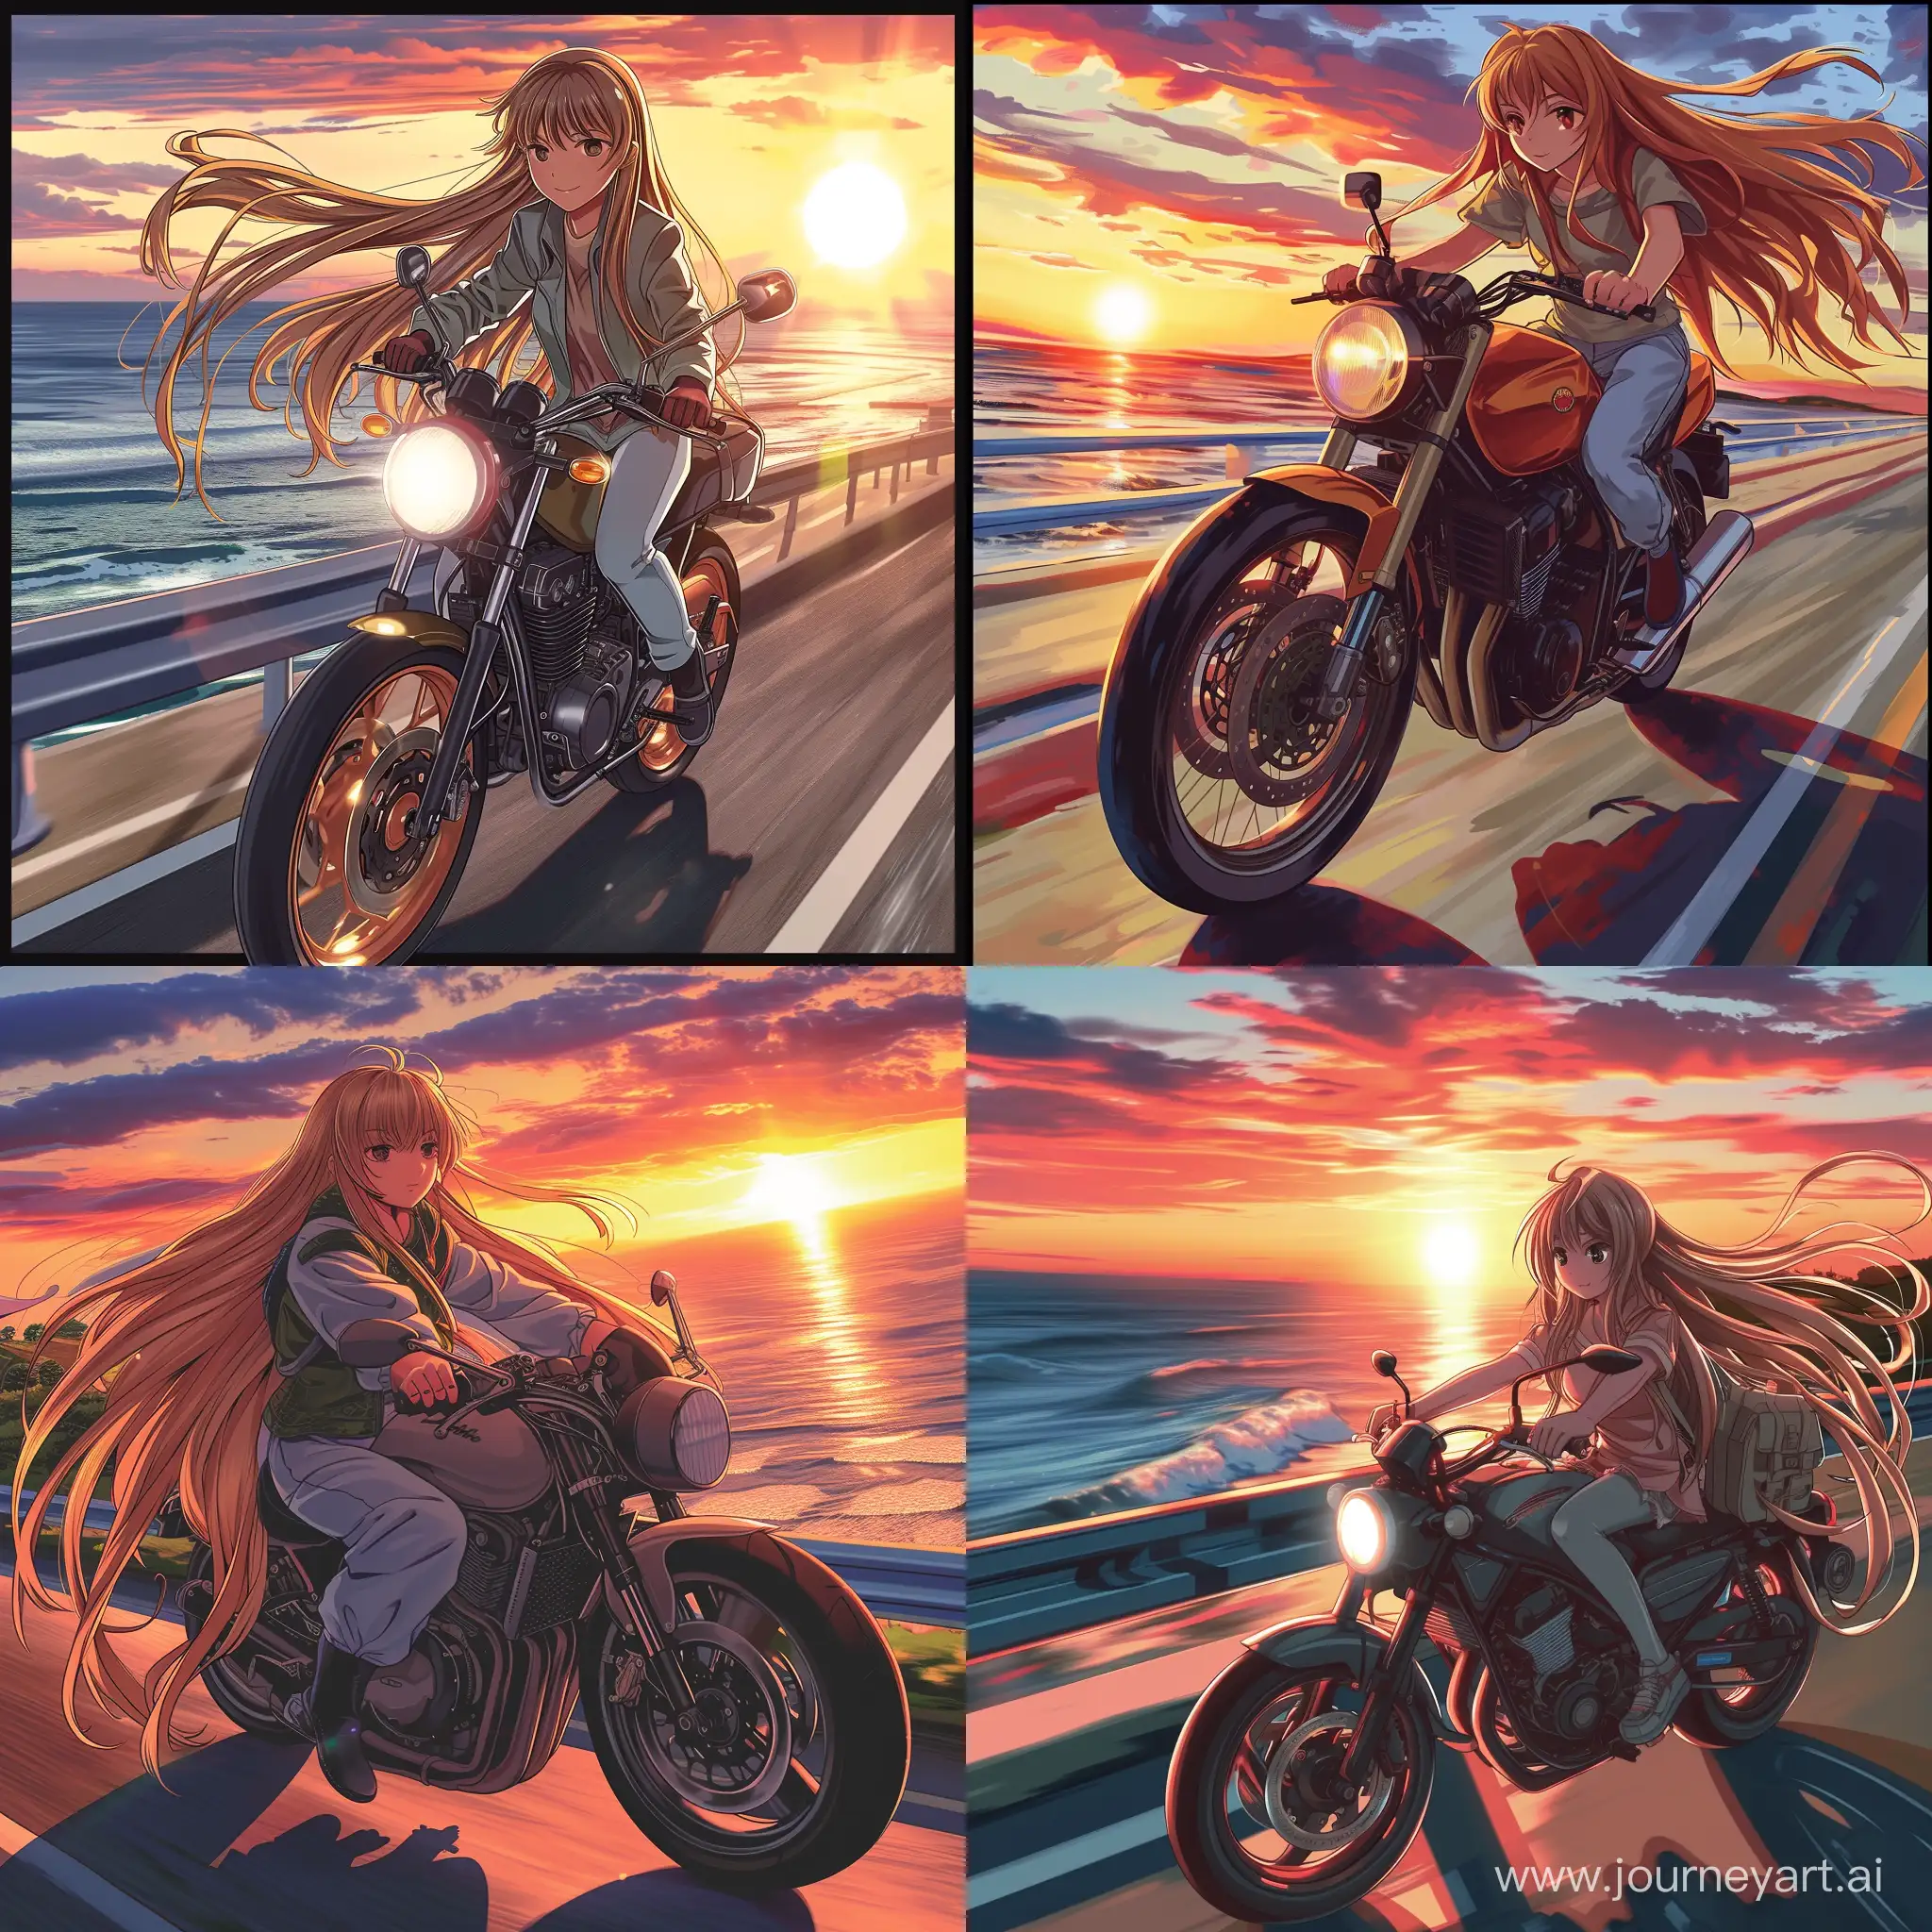 A long-haired woman dressed as a student driving a sports motorcycle on the road with the sea and the sunset in the background, retro anime style